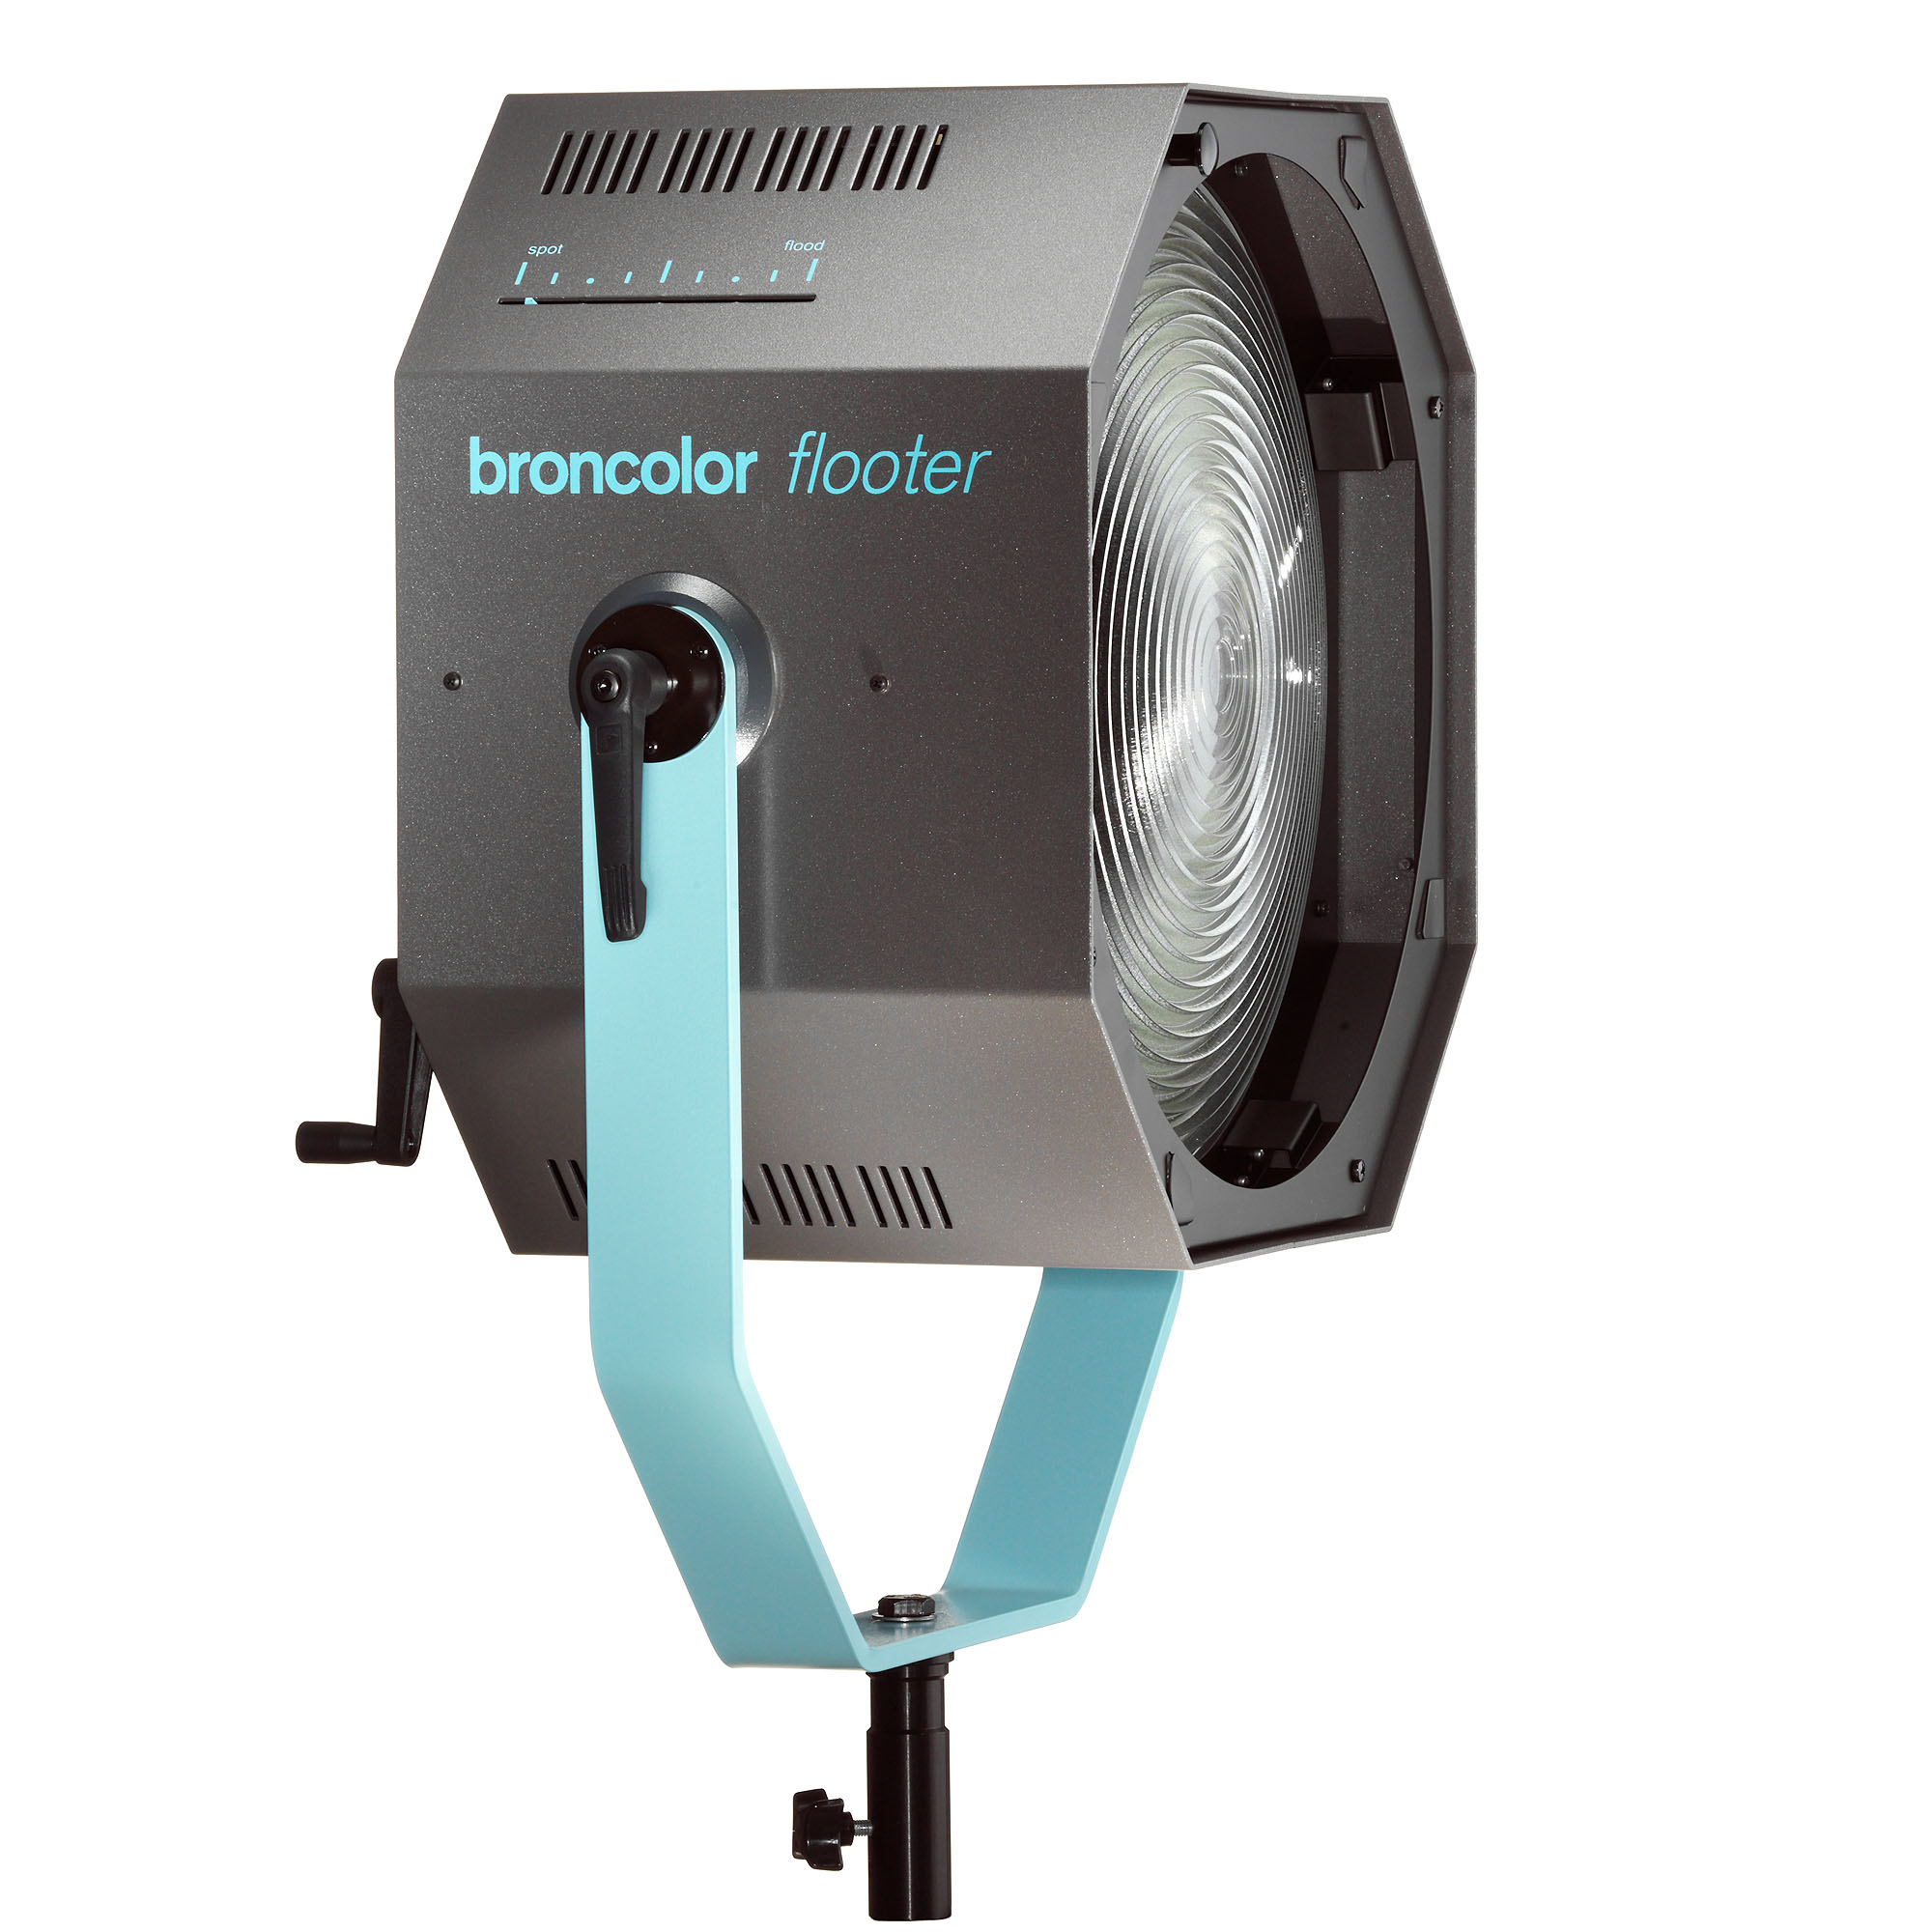 broncolor-flooter-s